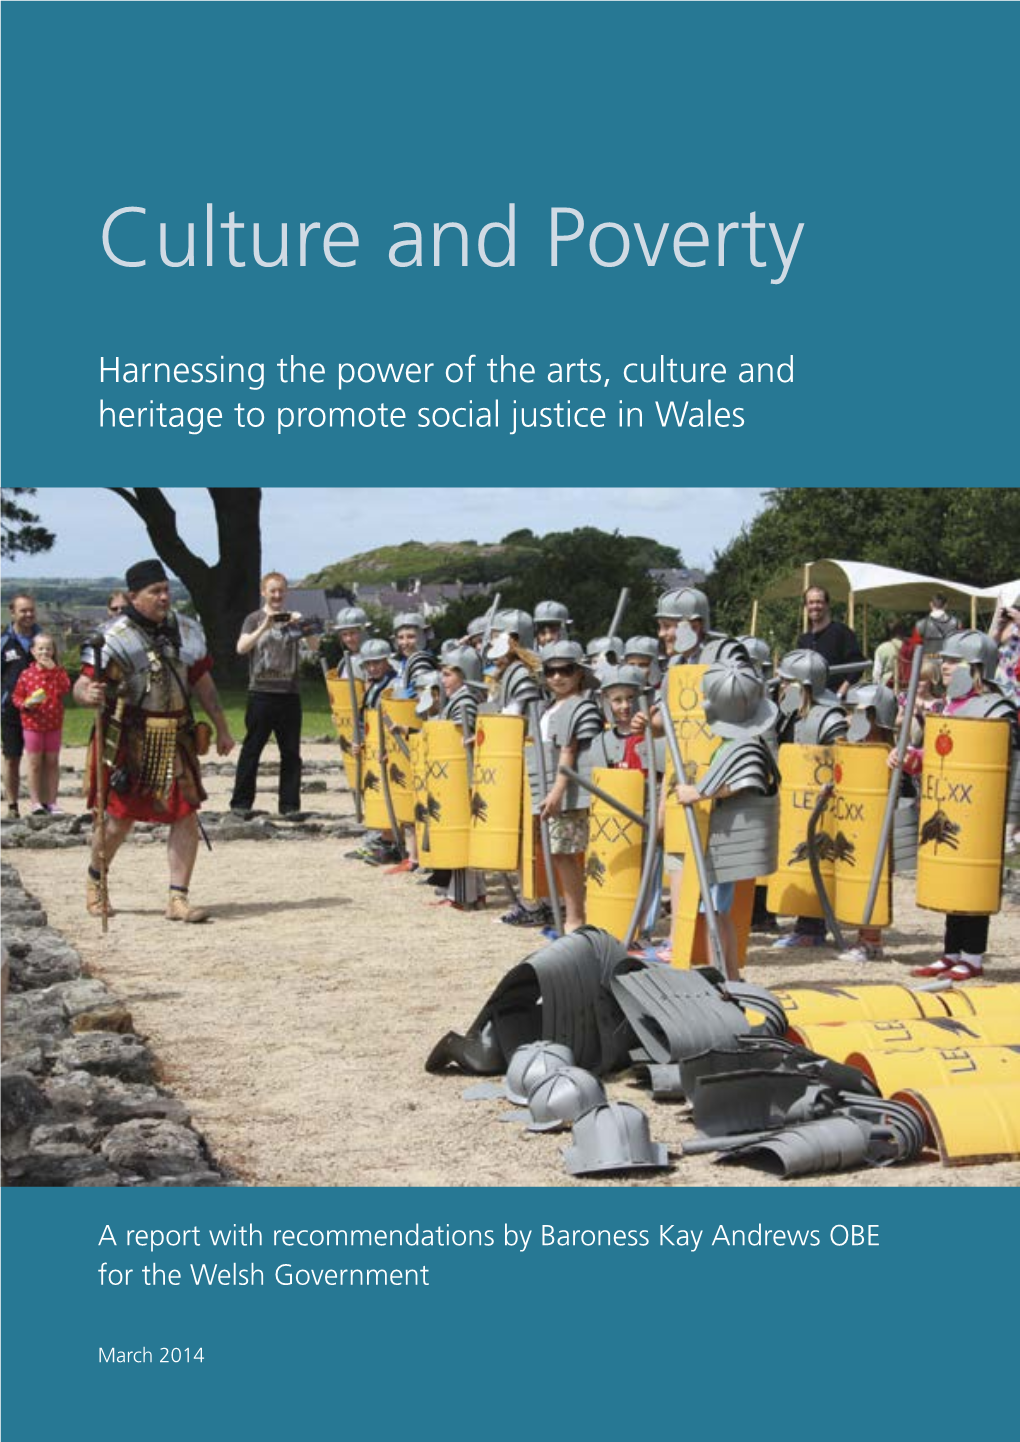 Culture and Poverty: Harnessing the Power of the Arts, Culture and Heritage to Promote Social Justice